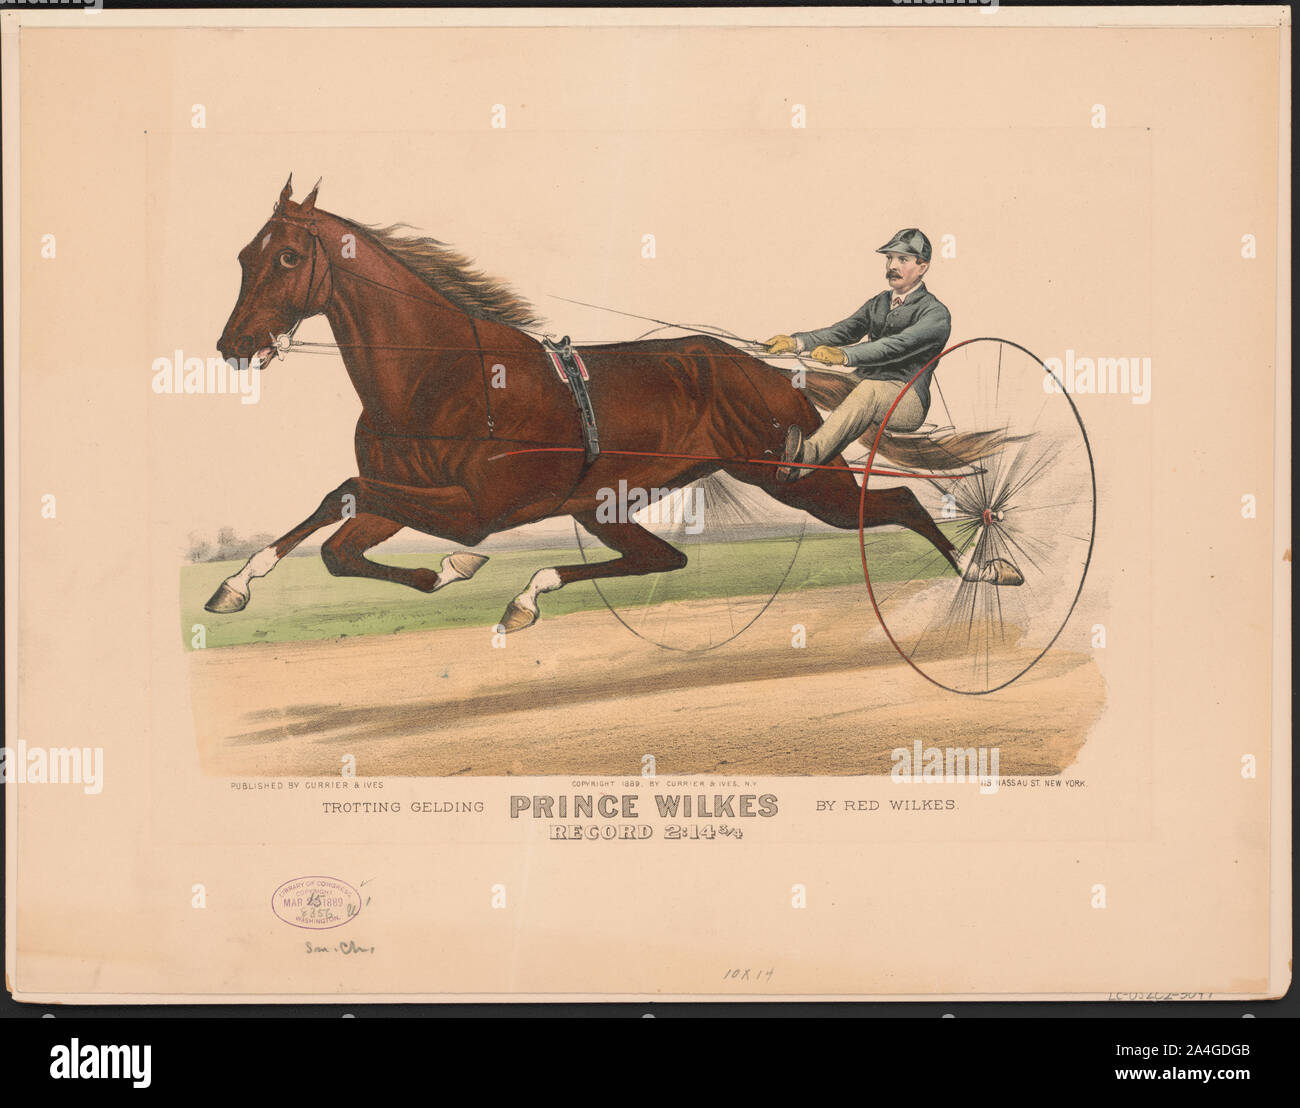 Trotting gelding Prince Wilkes by Red Wilkes: record 2:14 3/4 Stock Photo